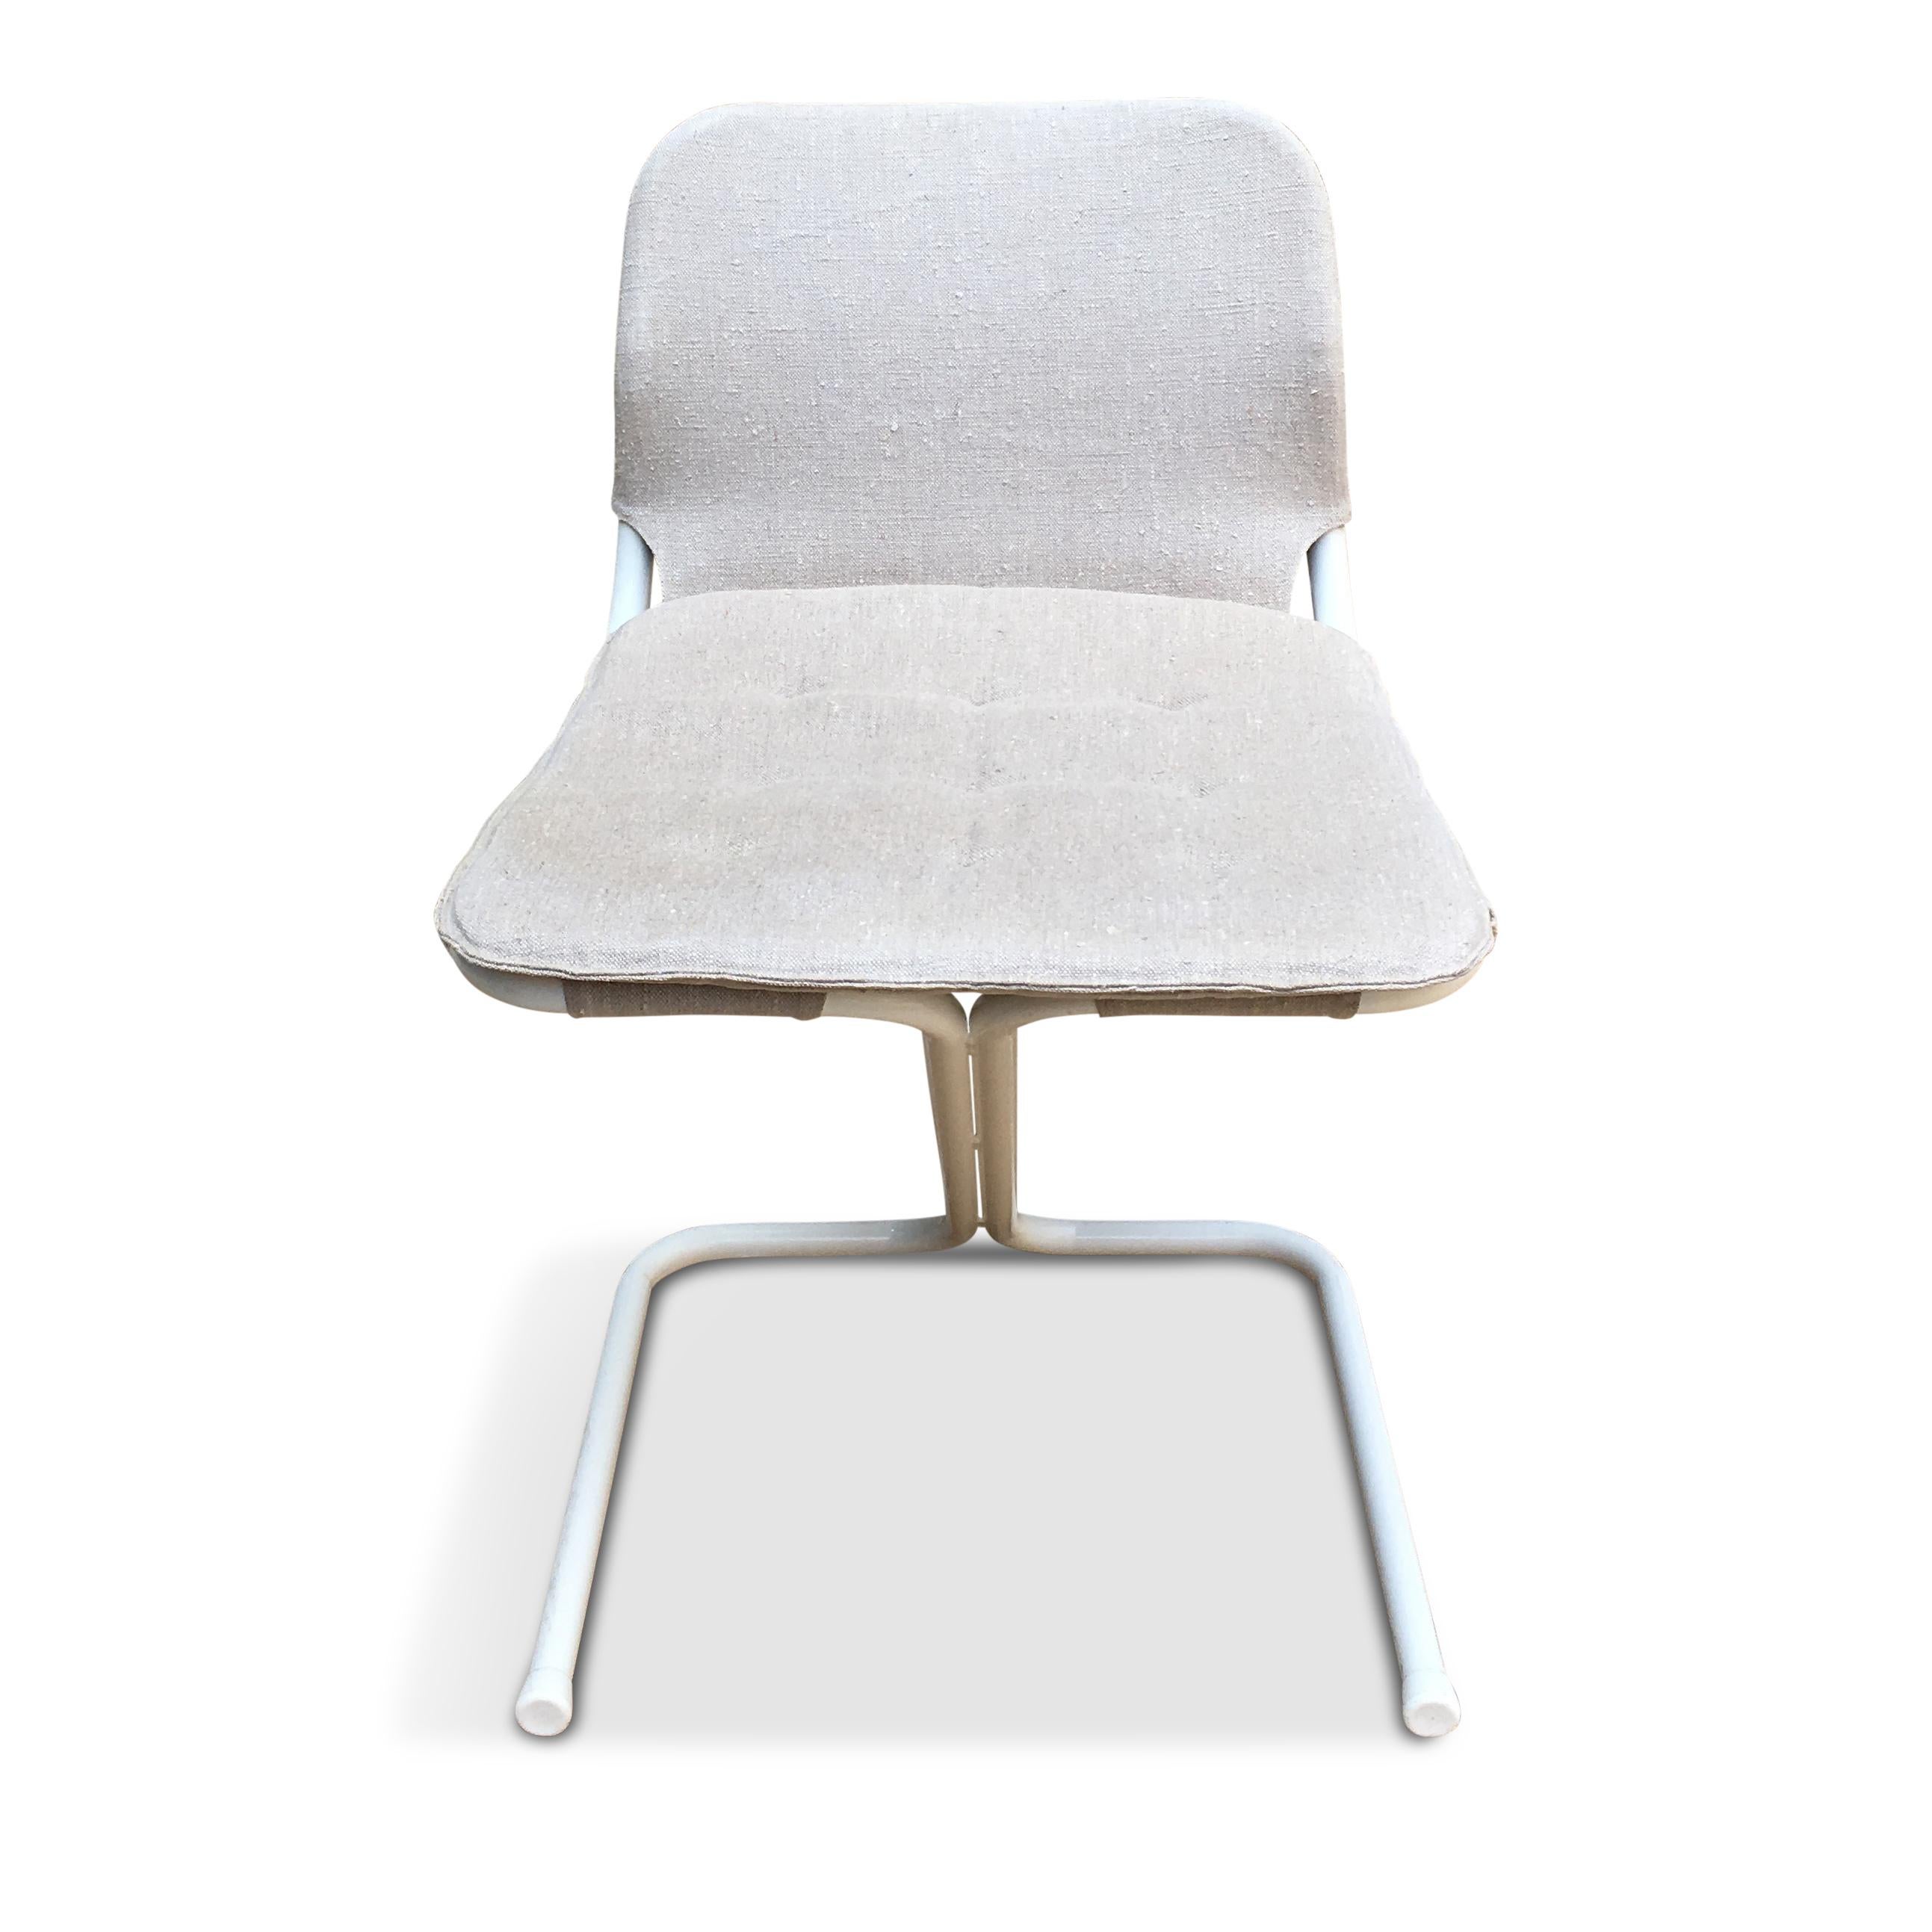 Mid-20th Century 4 Midcentury Swedish White Metal Stackable Chairs from DUX, 1968 For Sale